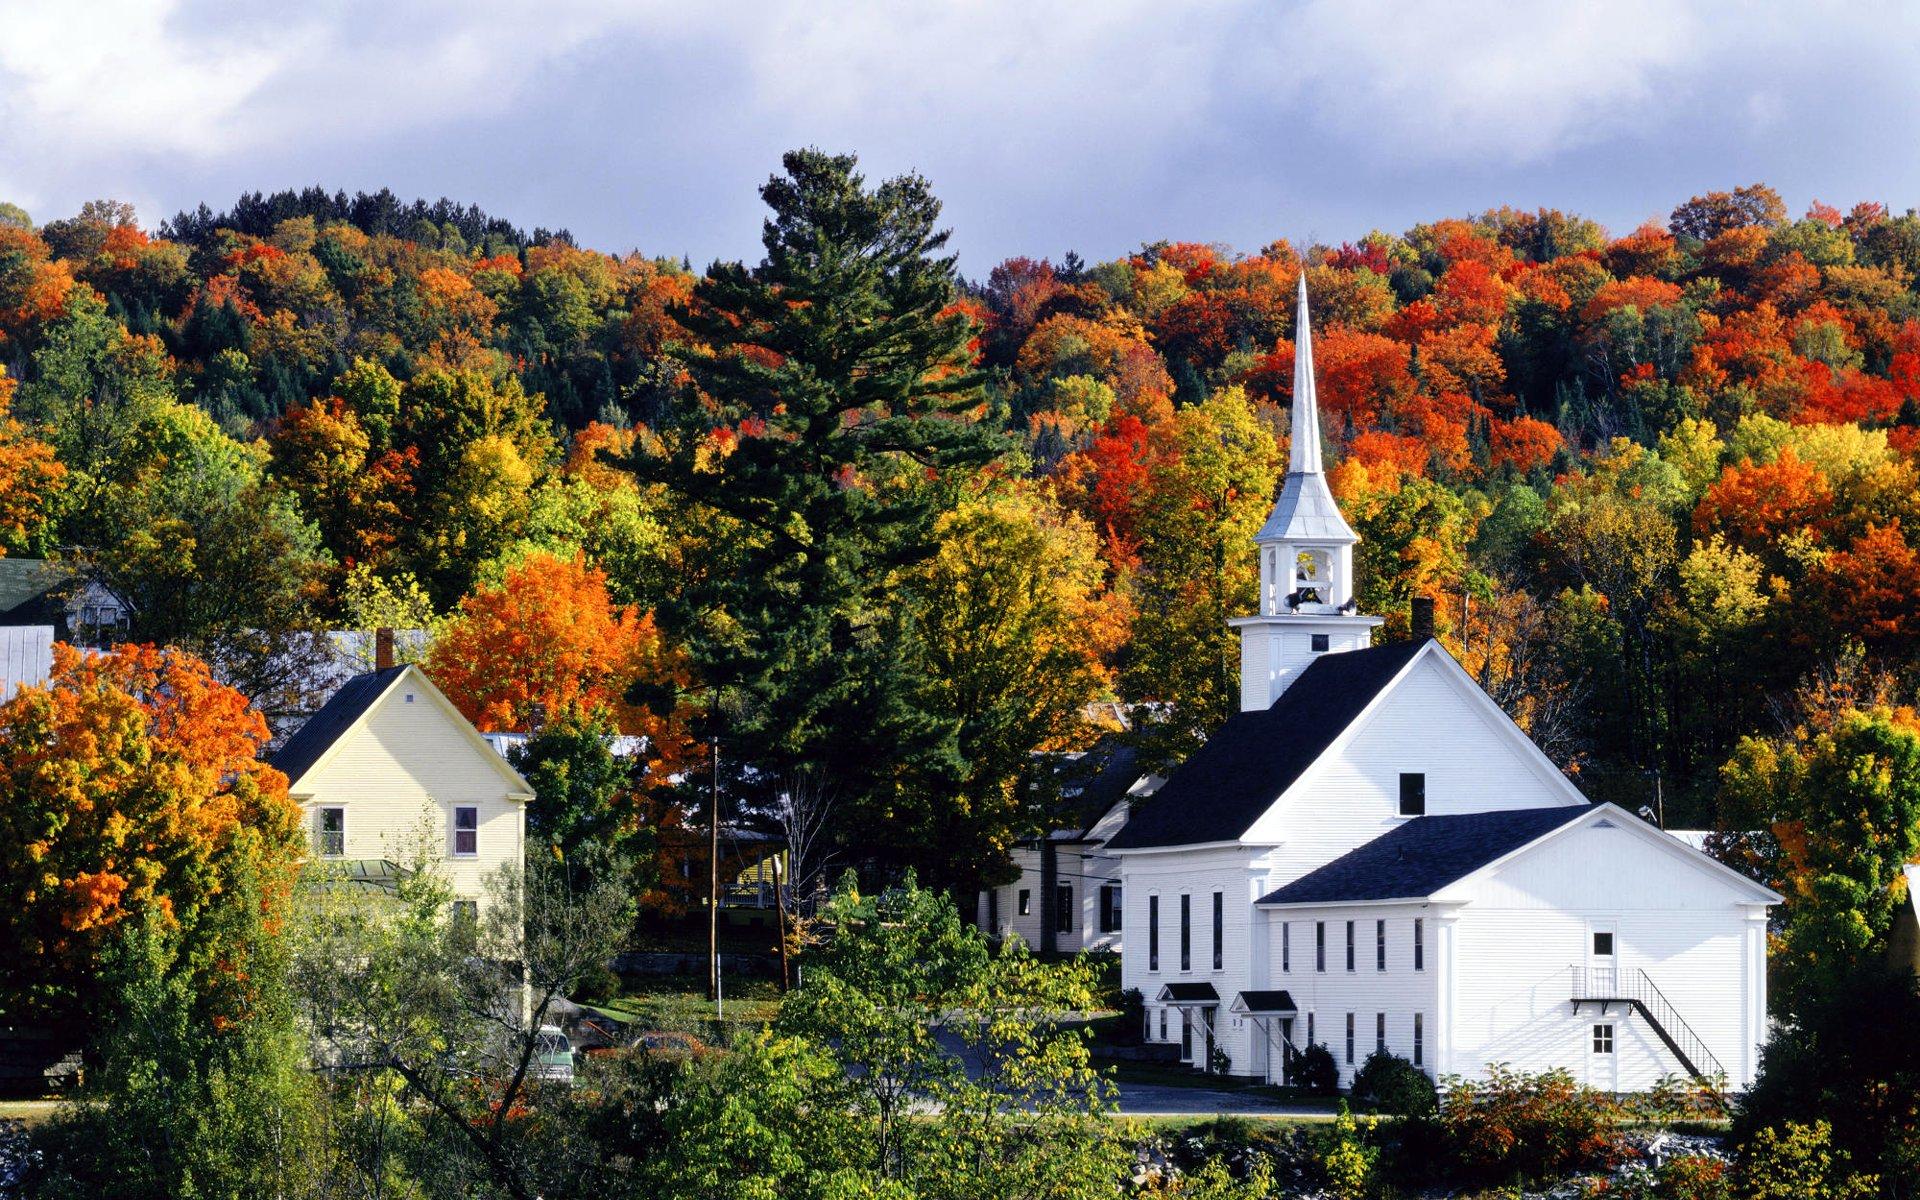 FILM SITES TO VISIT IN NEW ENGLAND of New England